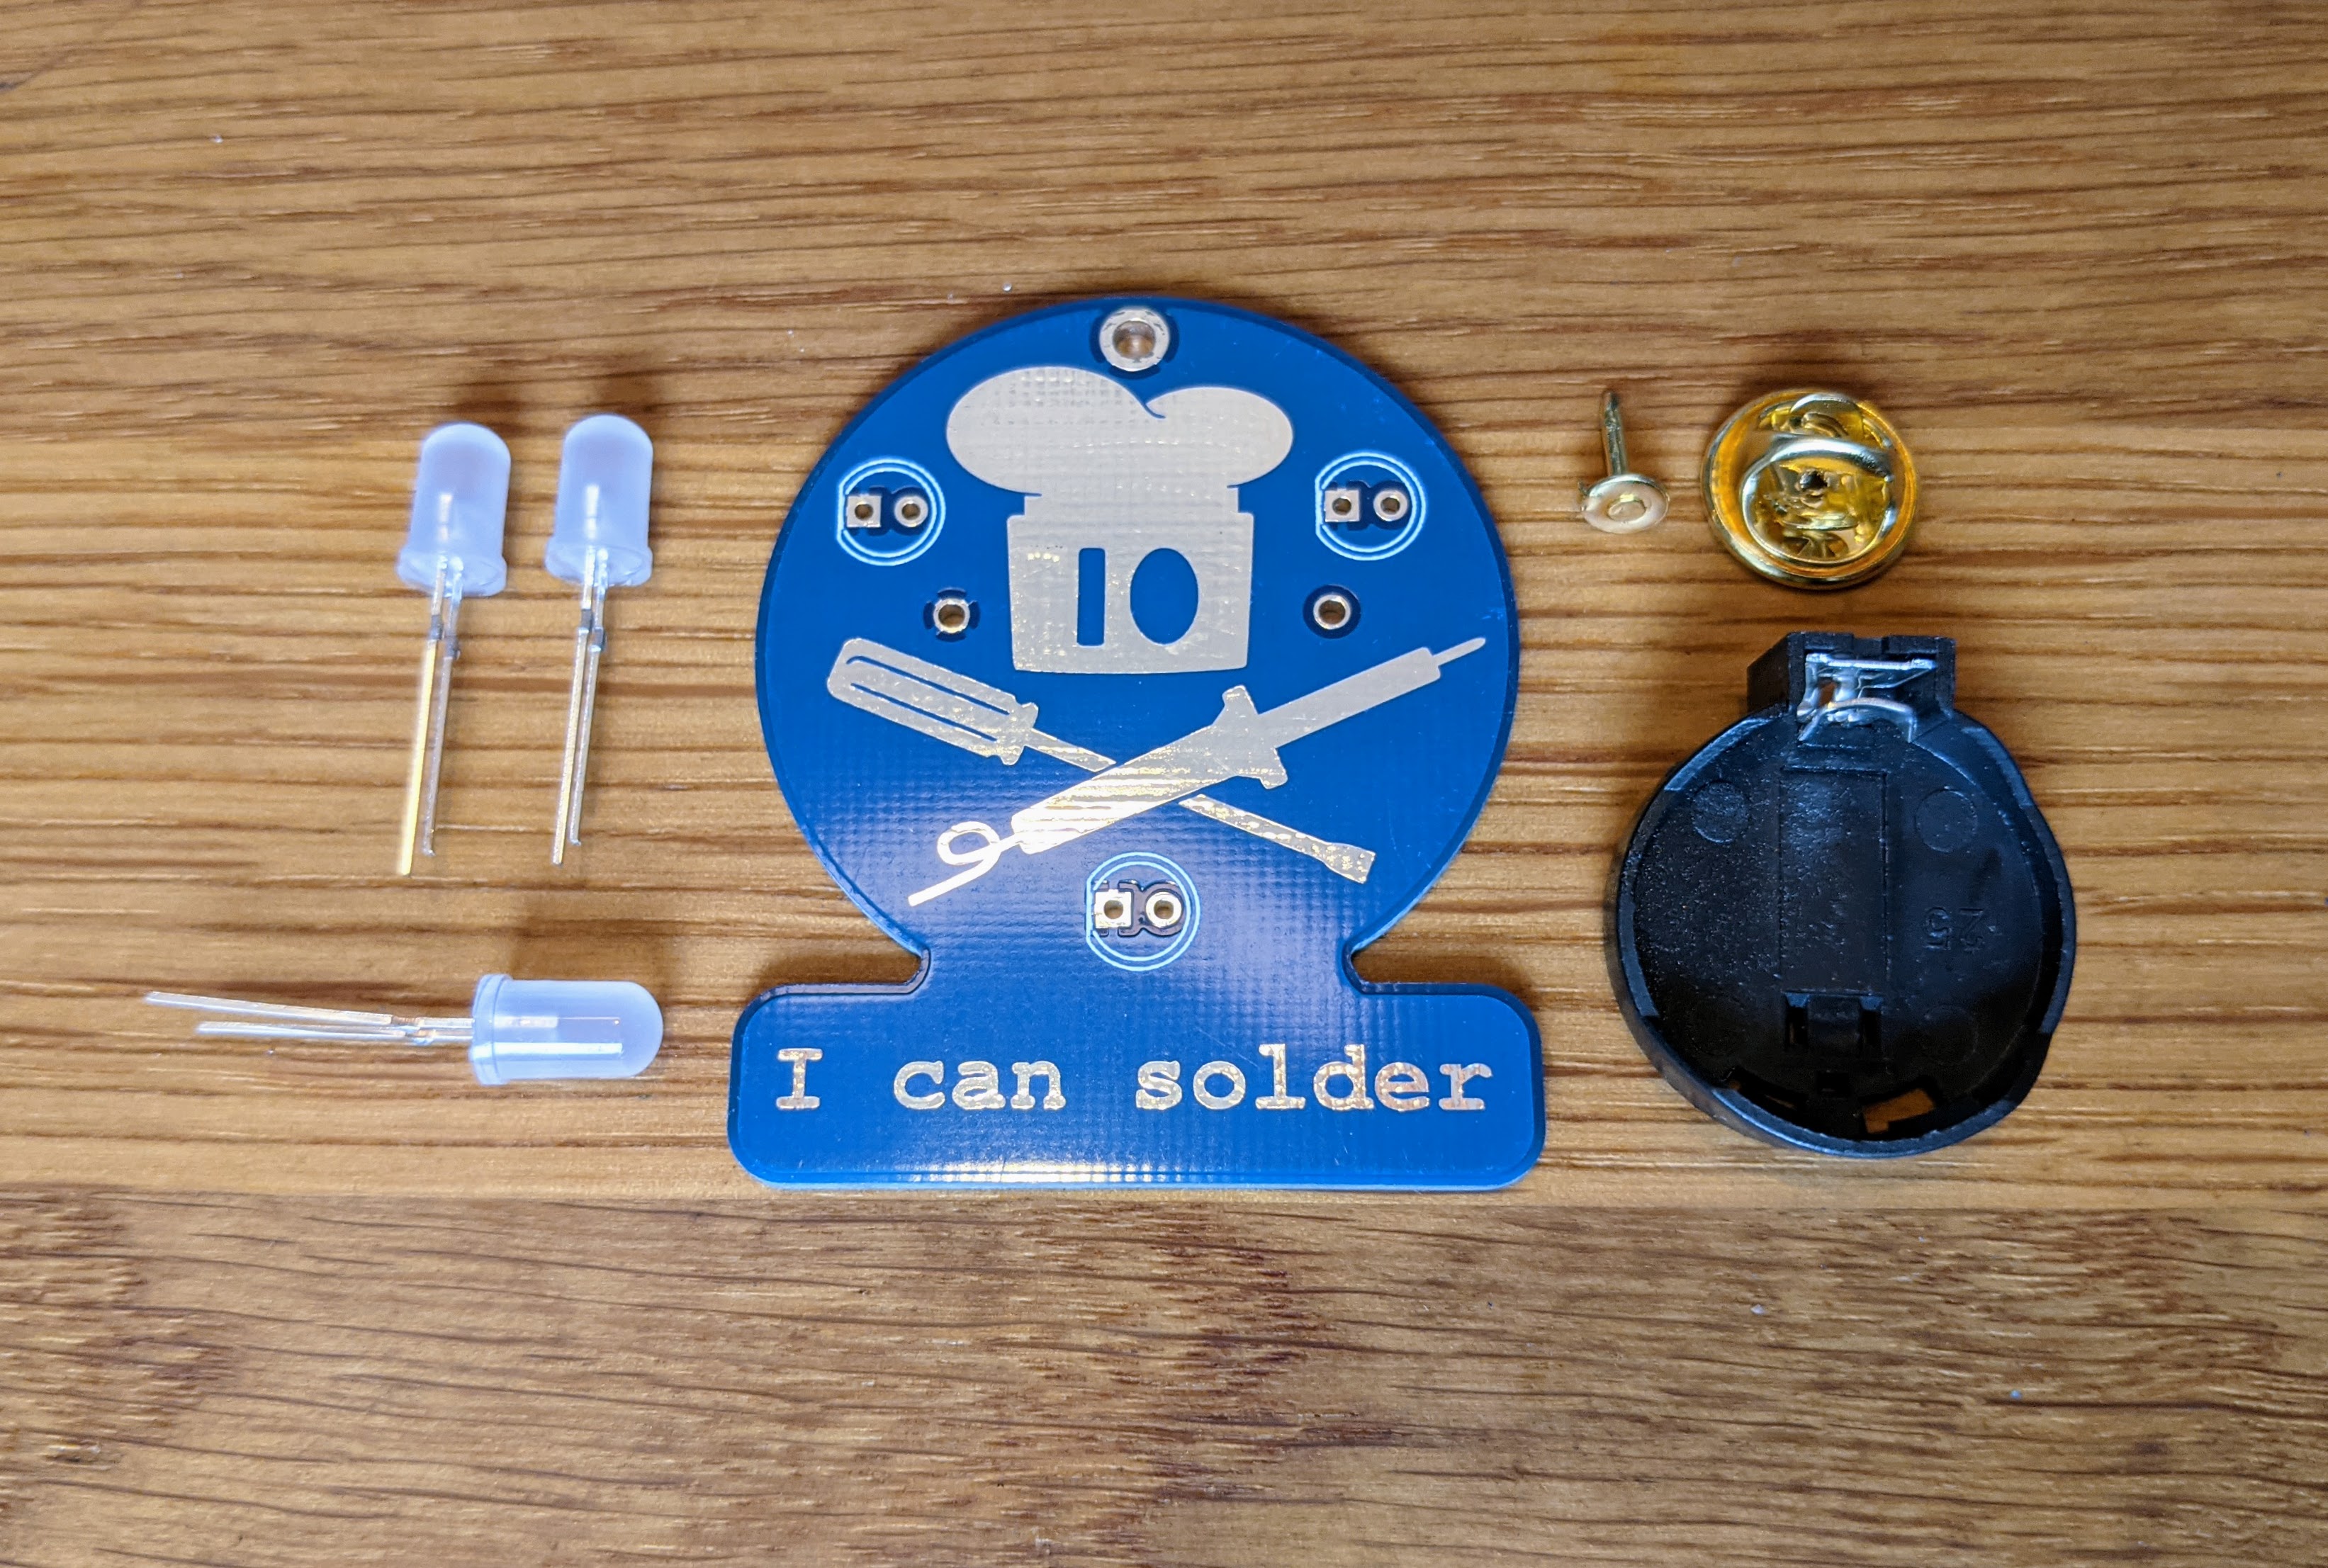 I can solder - This first soldering kit is suitable for everyone